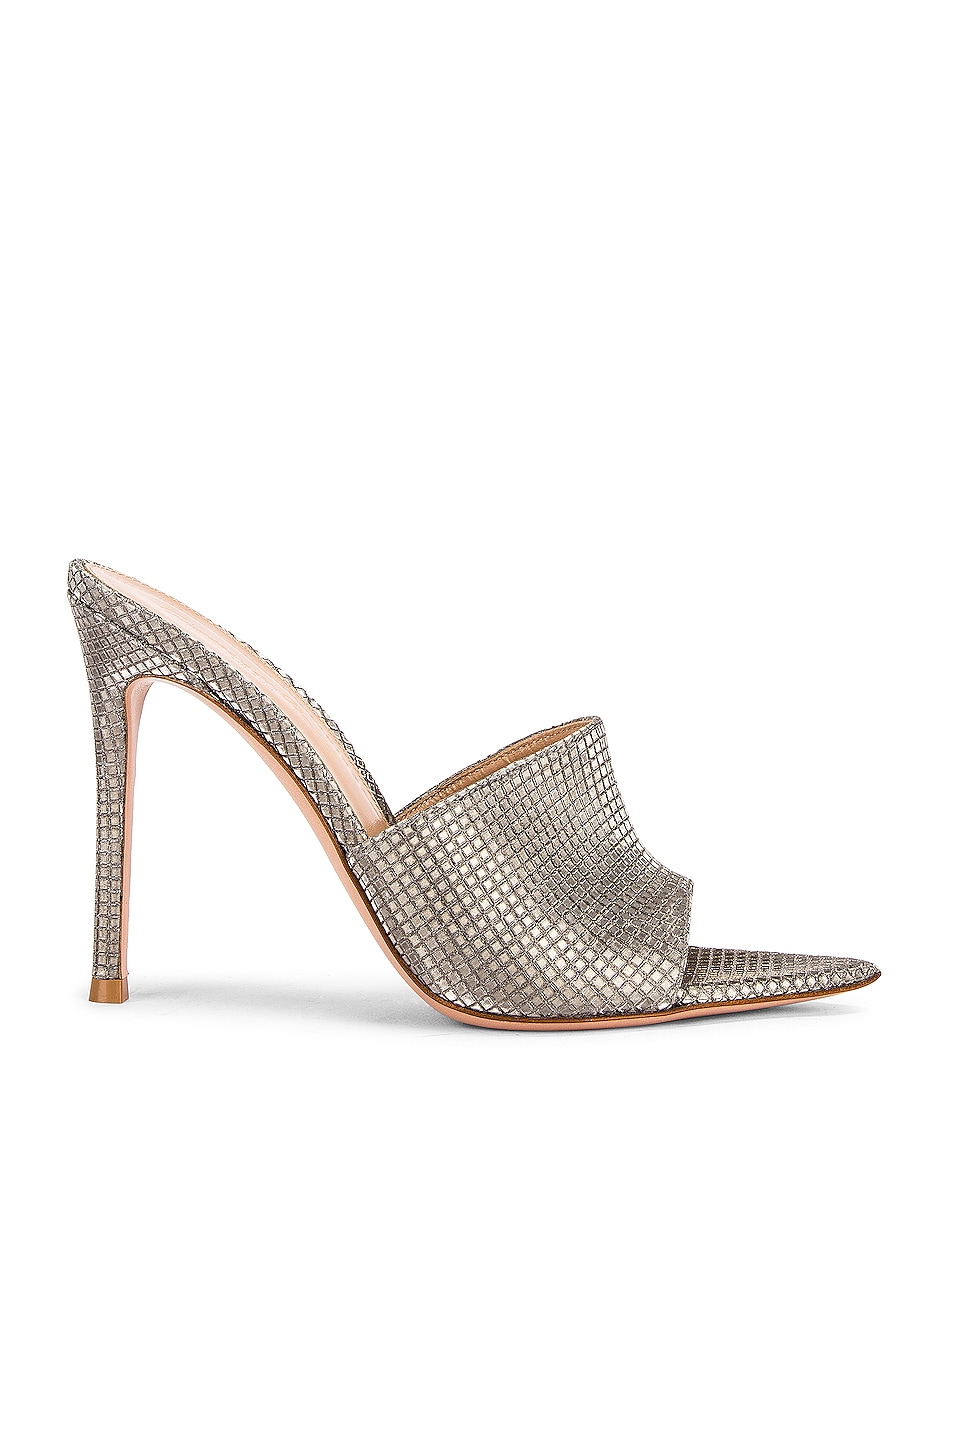 Image 1 of Gianvito Rossi Alise Mules in Steel